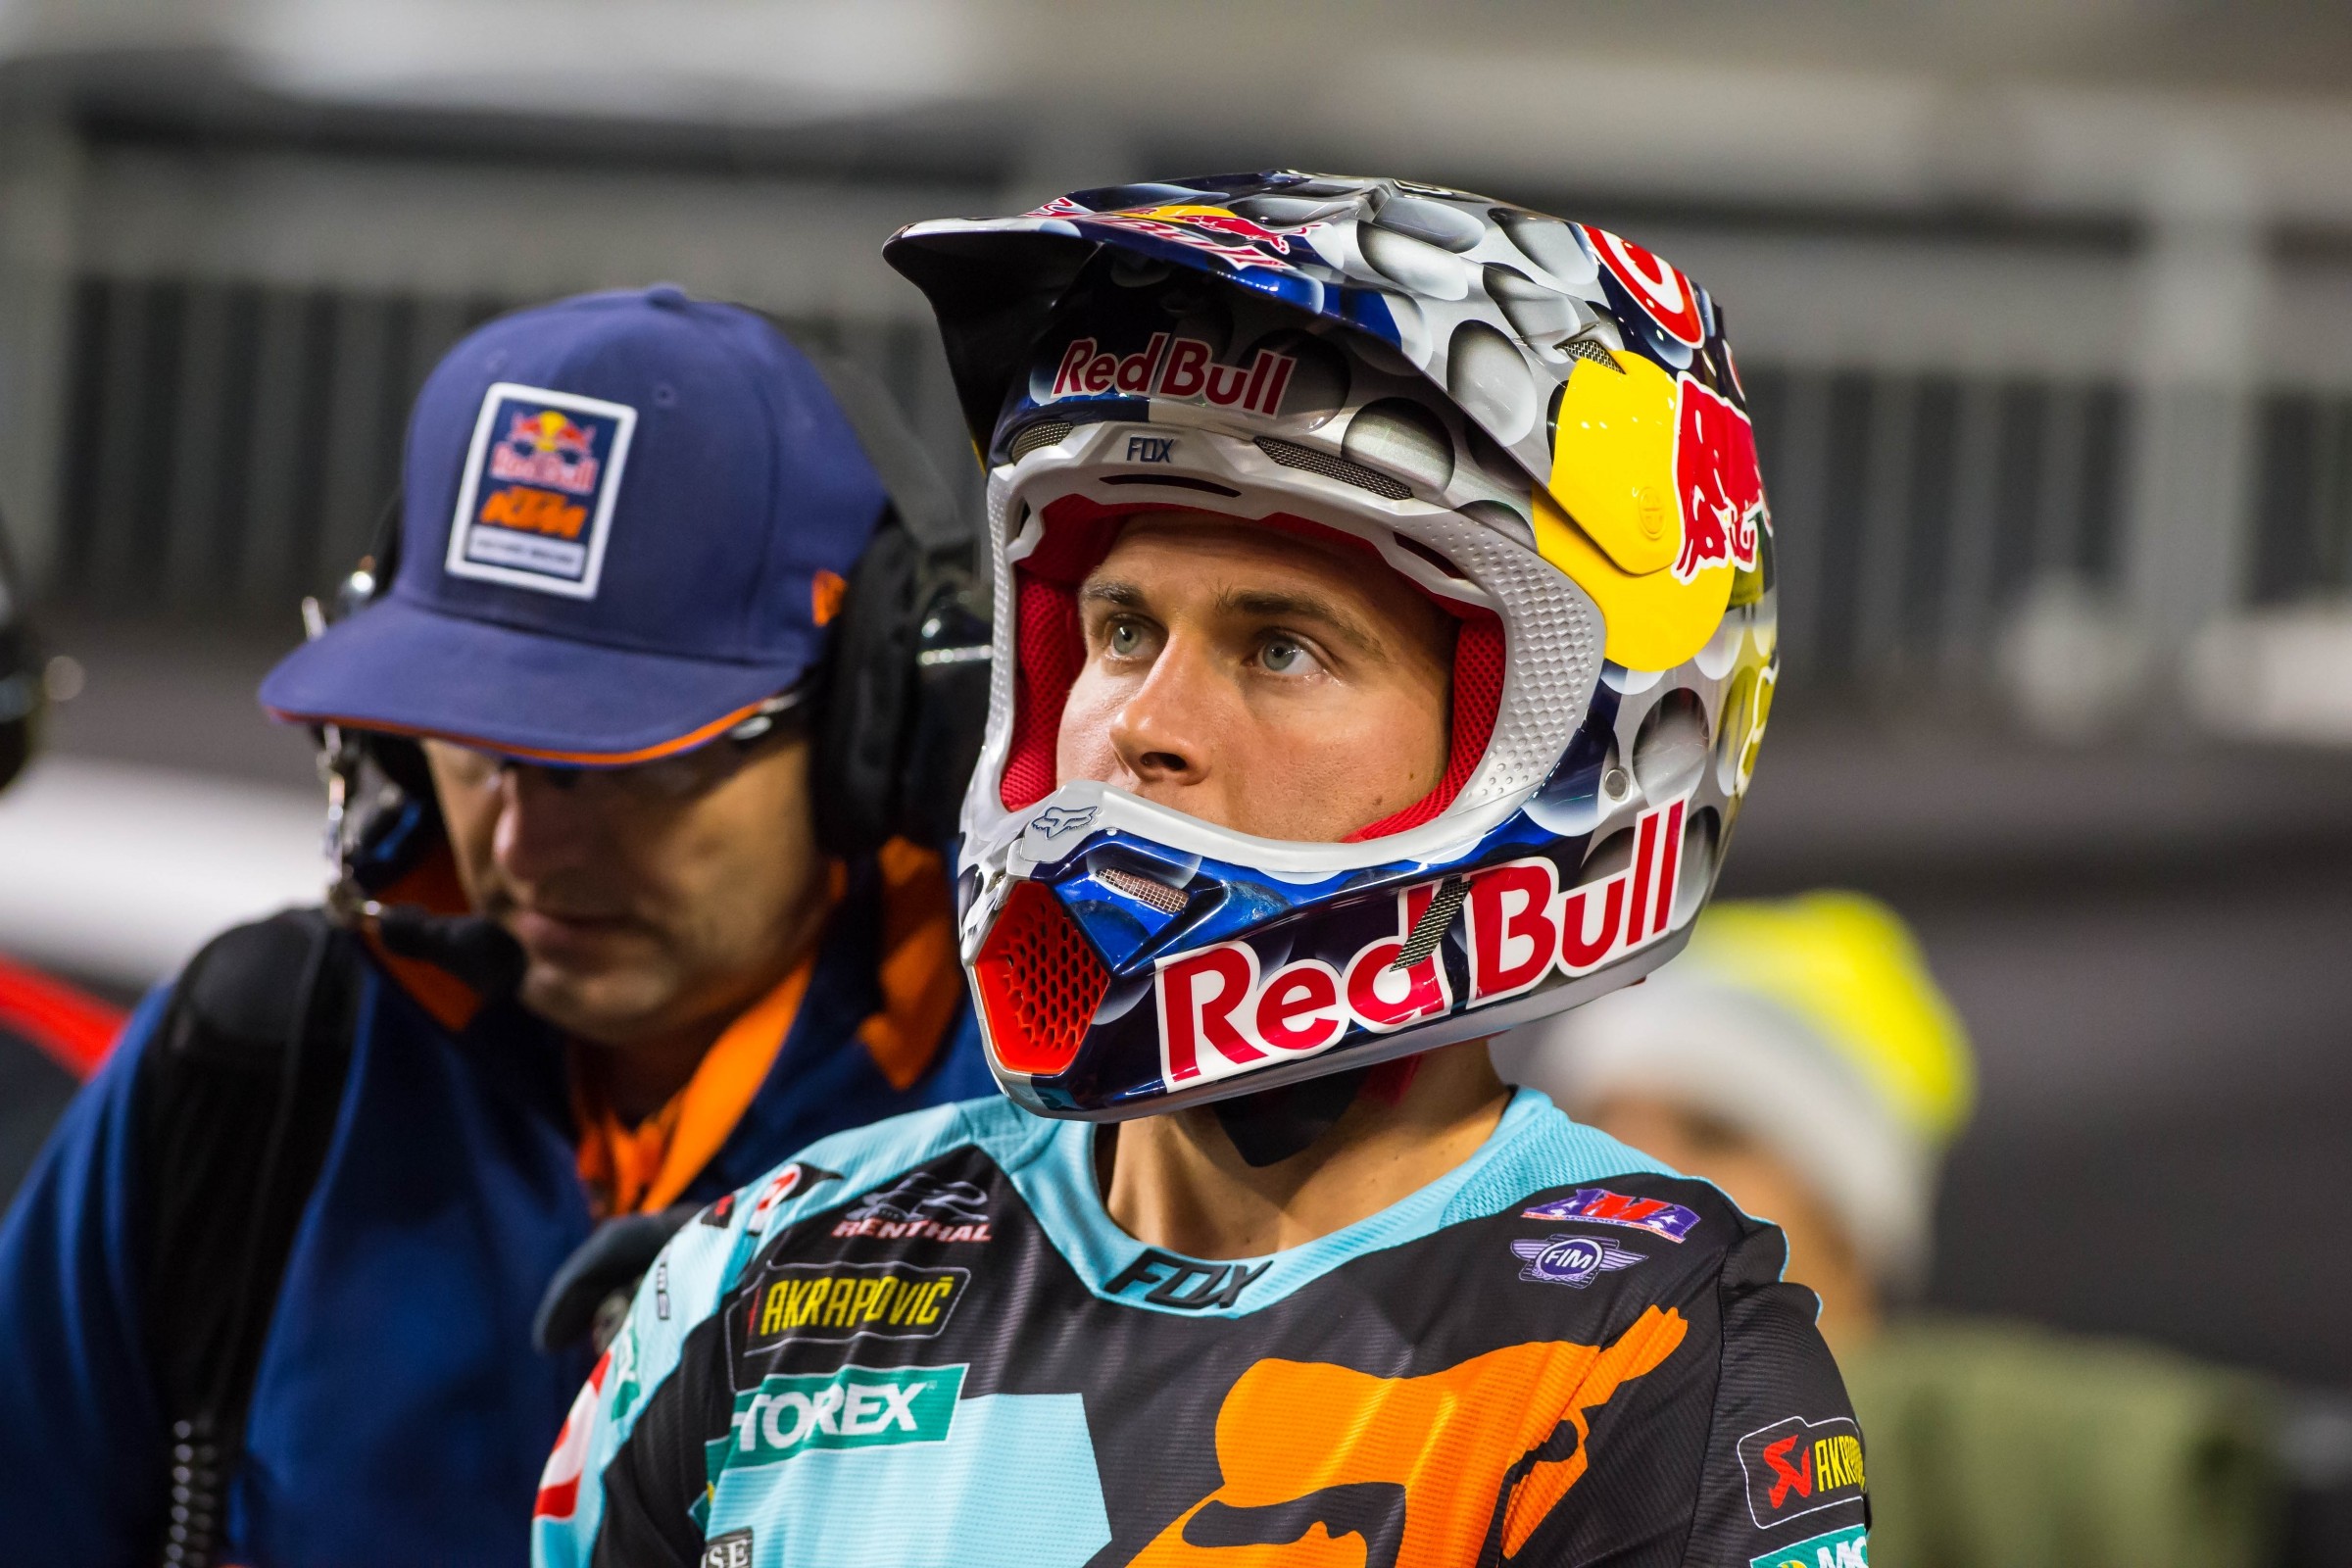 Ryan Dungey Nominated For An ESPY | Vote Now - Racer X Online